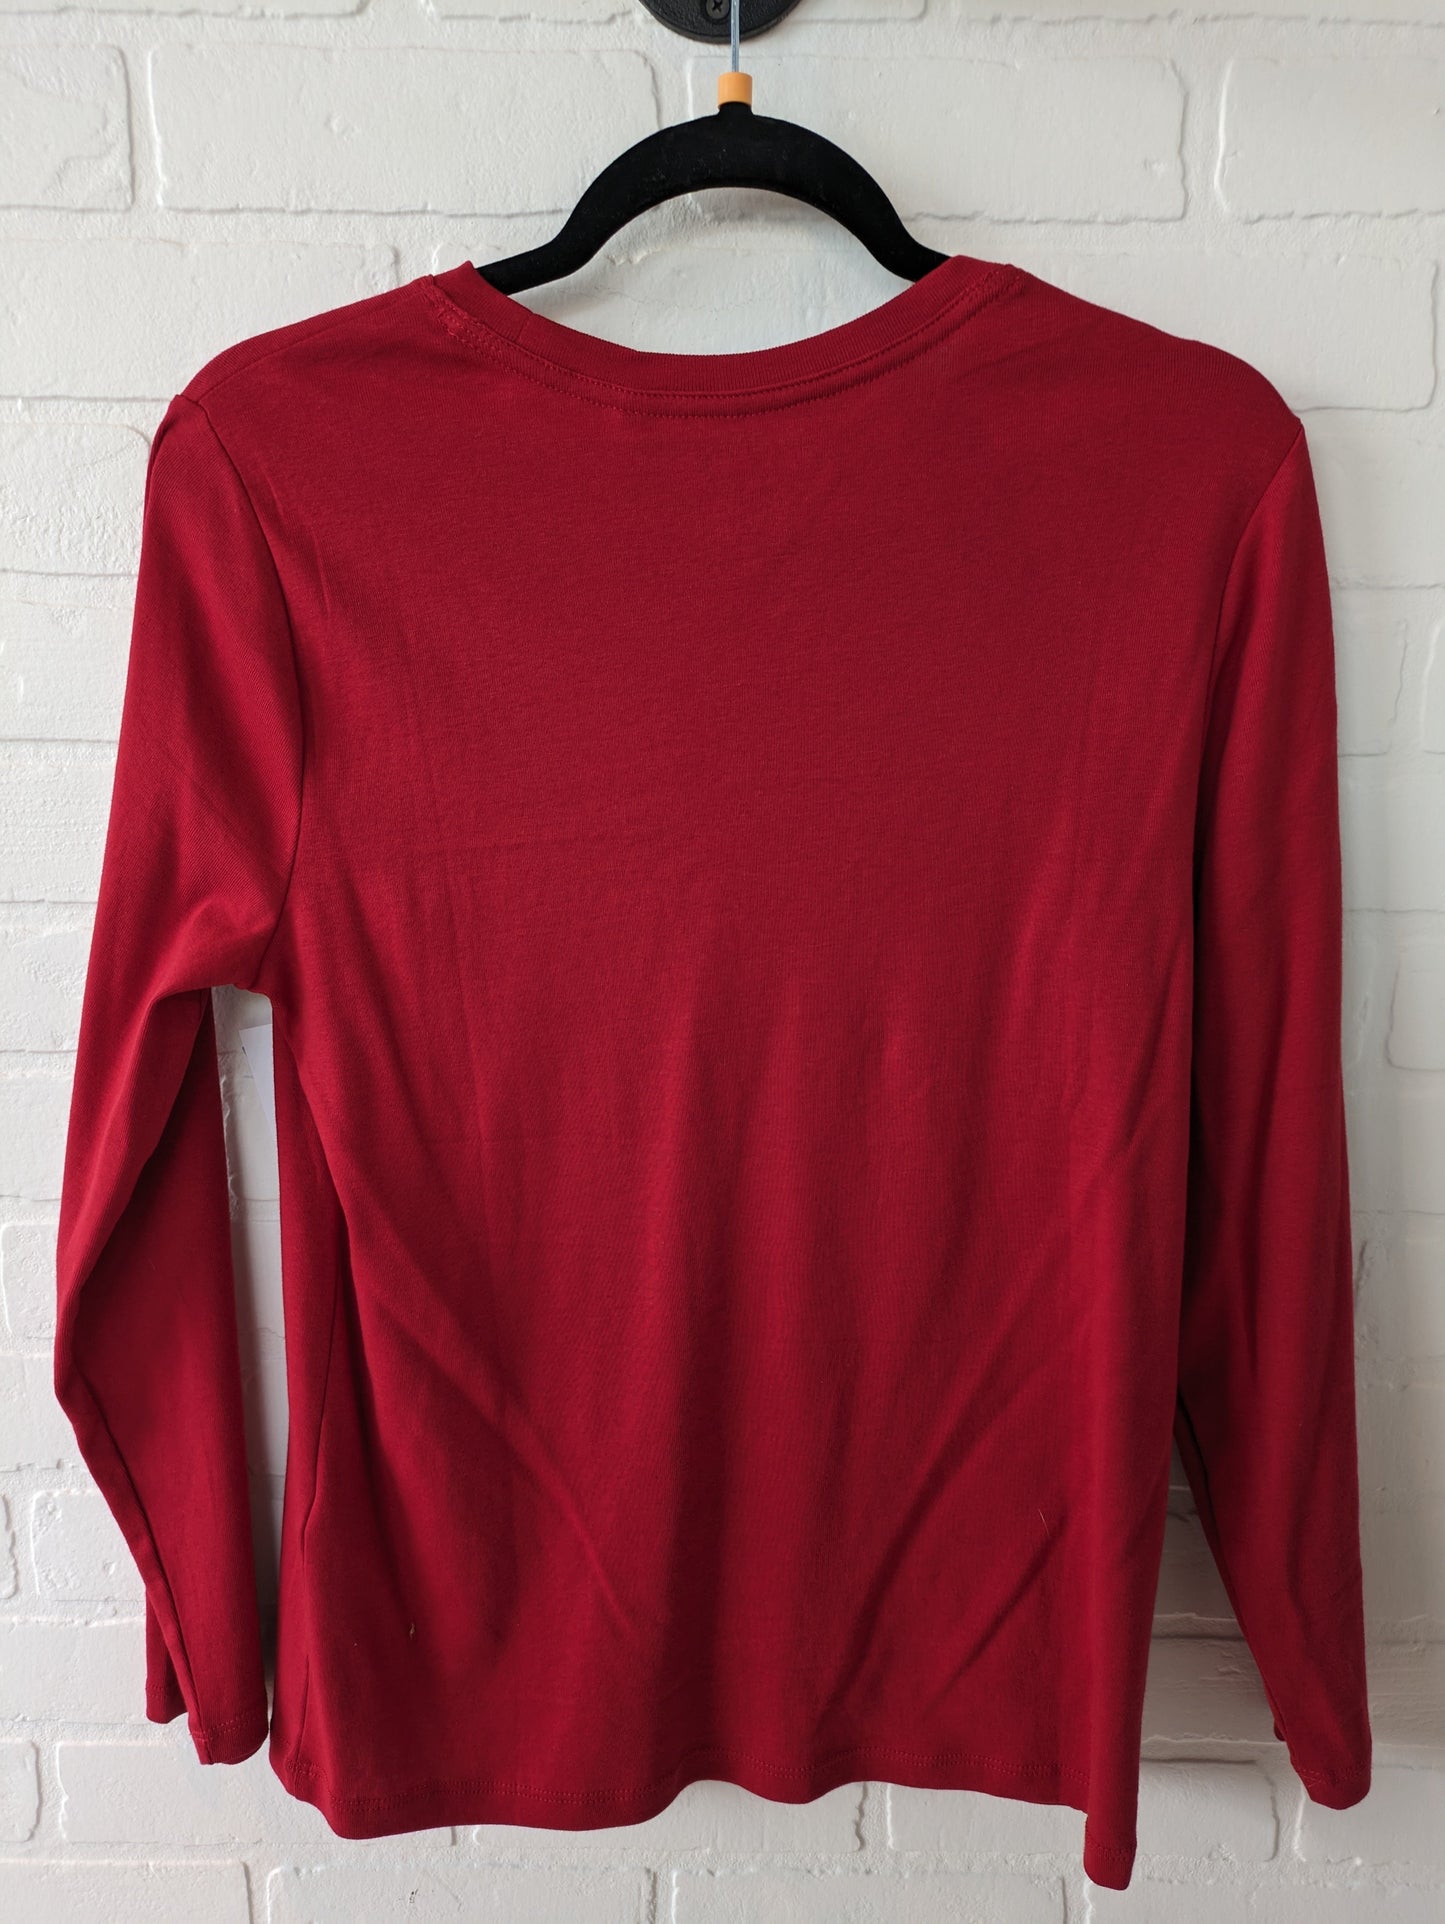 Top Long Sleeve Basic By Chicos  Size: L